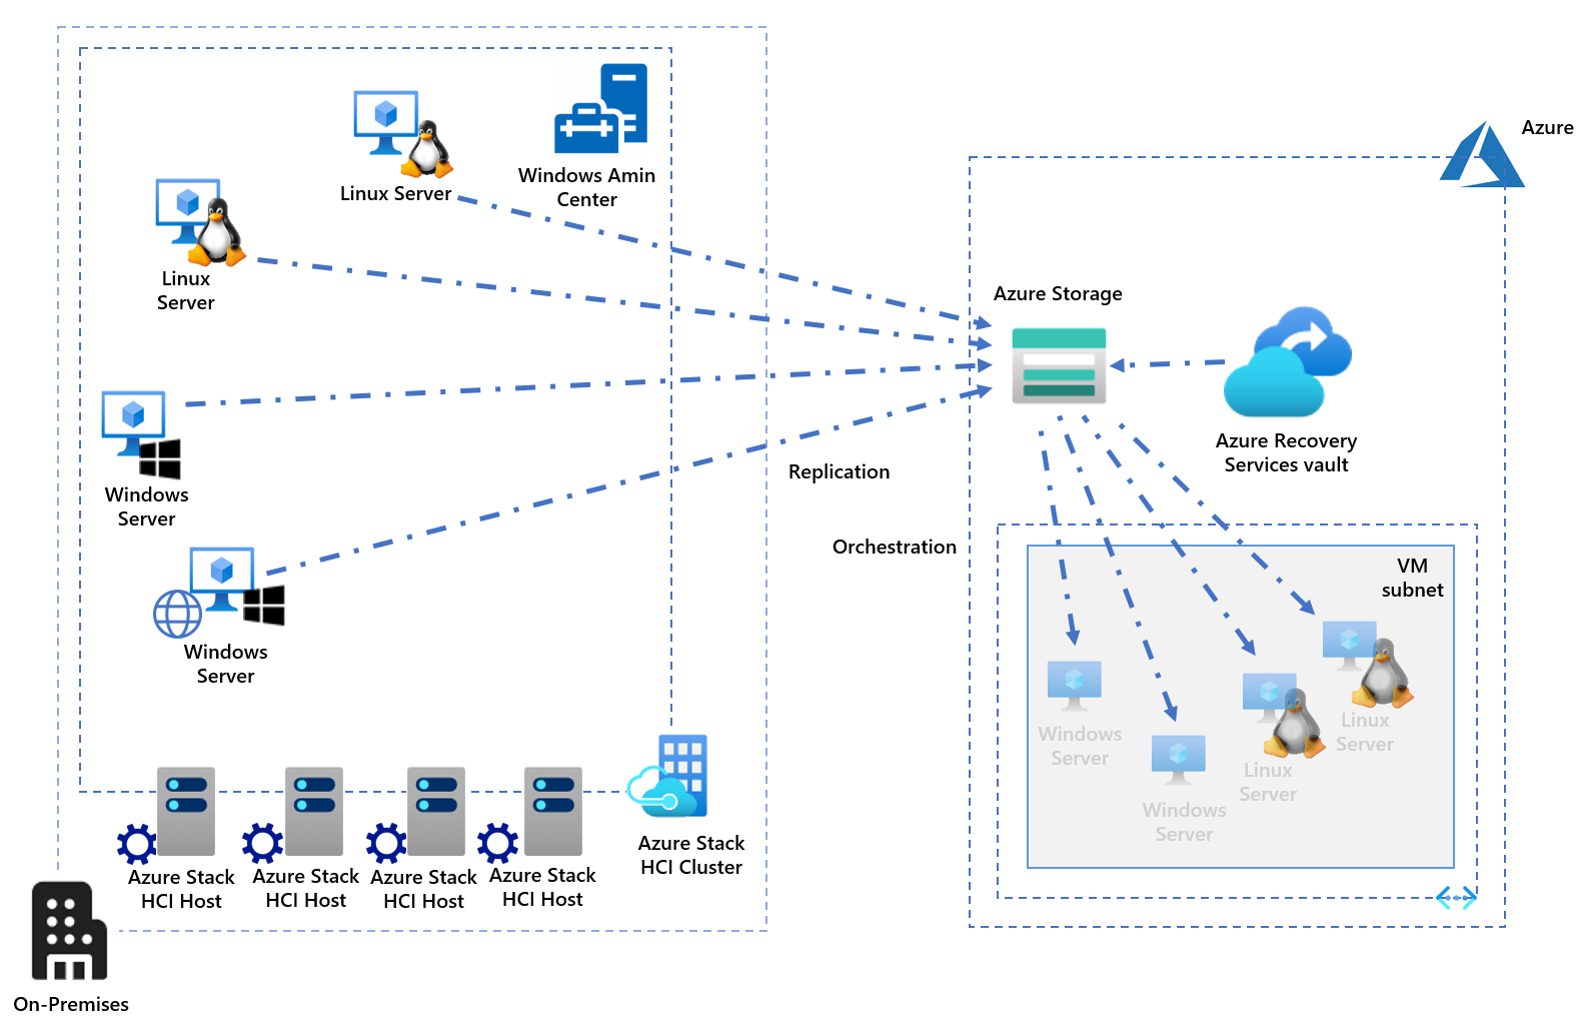 The diagram depicts how Azure Stack HCI integrates with Azure Site Recovery through agents installed on cluster nodes. The agents keep track of local disk writes and continuously replicate them to Azure Storage, controlled by Azure Site Recovery vault. During a failover, Azure Site Recovery dynamically provisions Azure virtual machines into a designated virtual network. Windows Admin Center streamlines the onboarding process. 